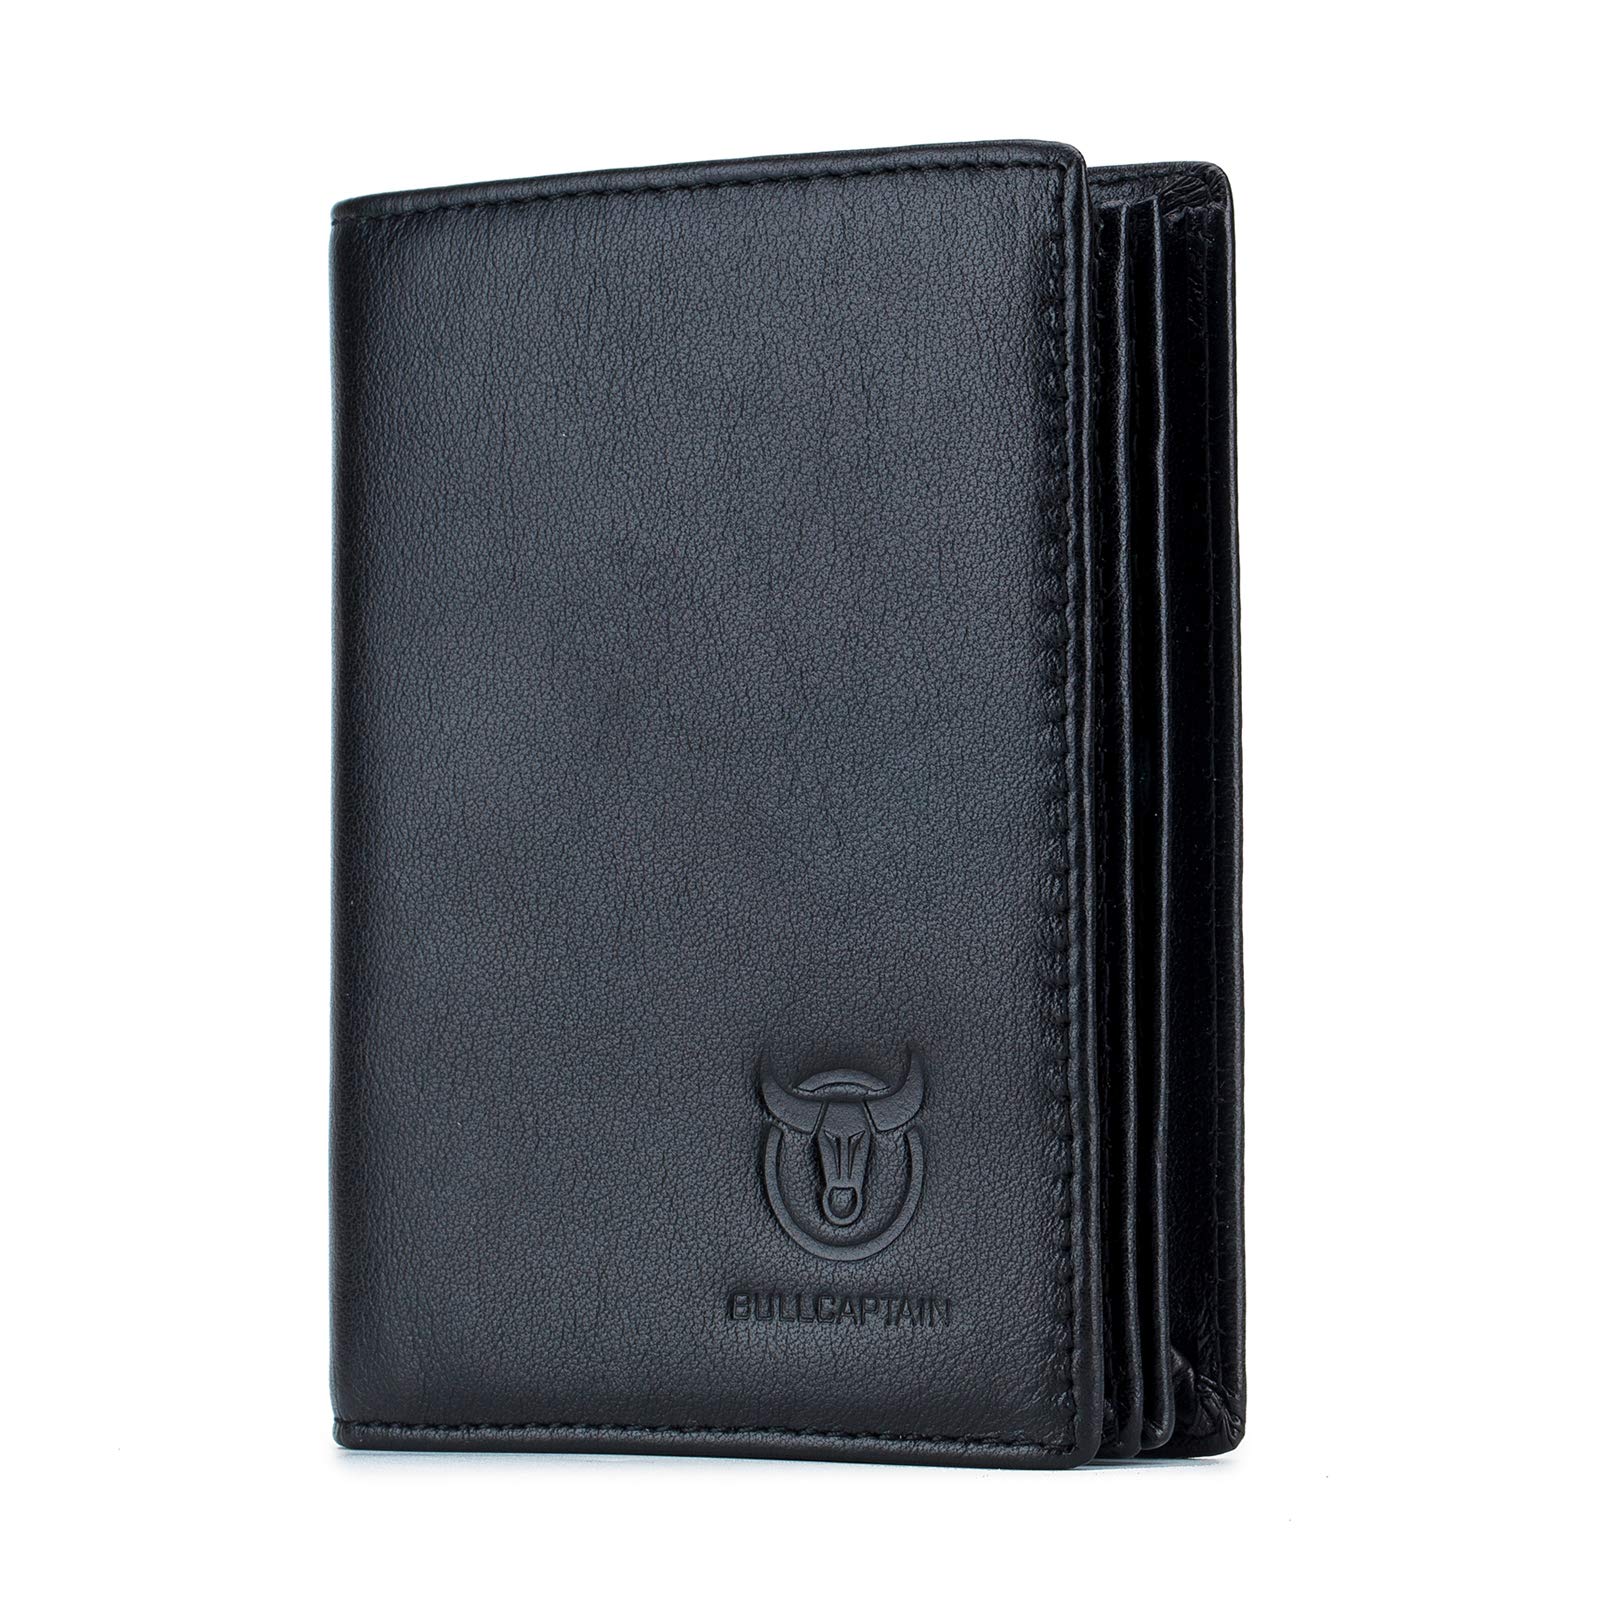 Amazon.com: BULLCAPTAIN Large Capacity Genuine Leather Bifold Wallet/Credit Card Holder for Men with 15 Card Slots QB-027 (Black) : Clothing, Shoes & Jewelry $25